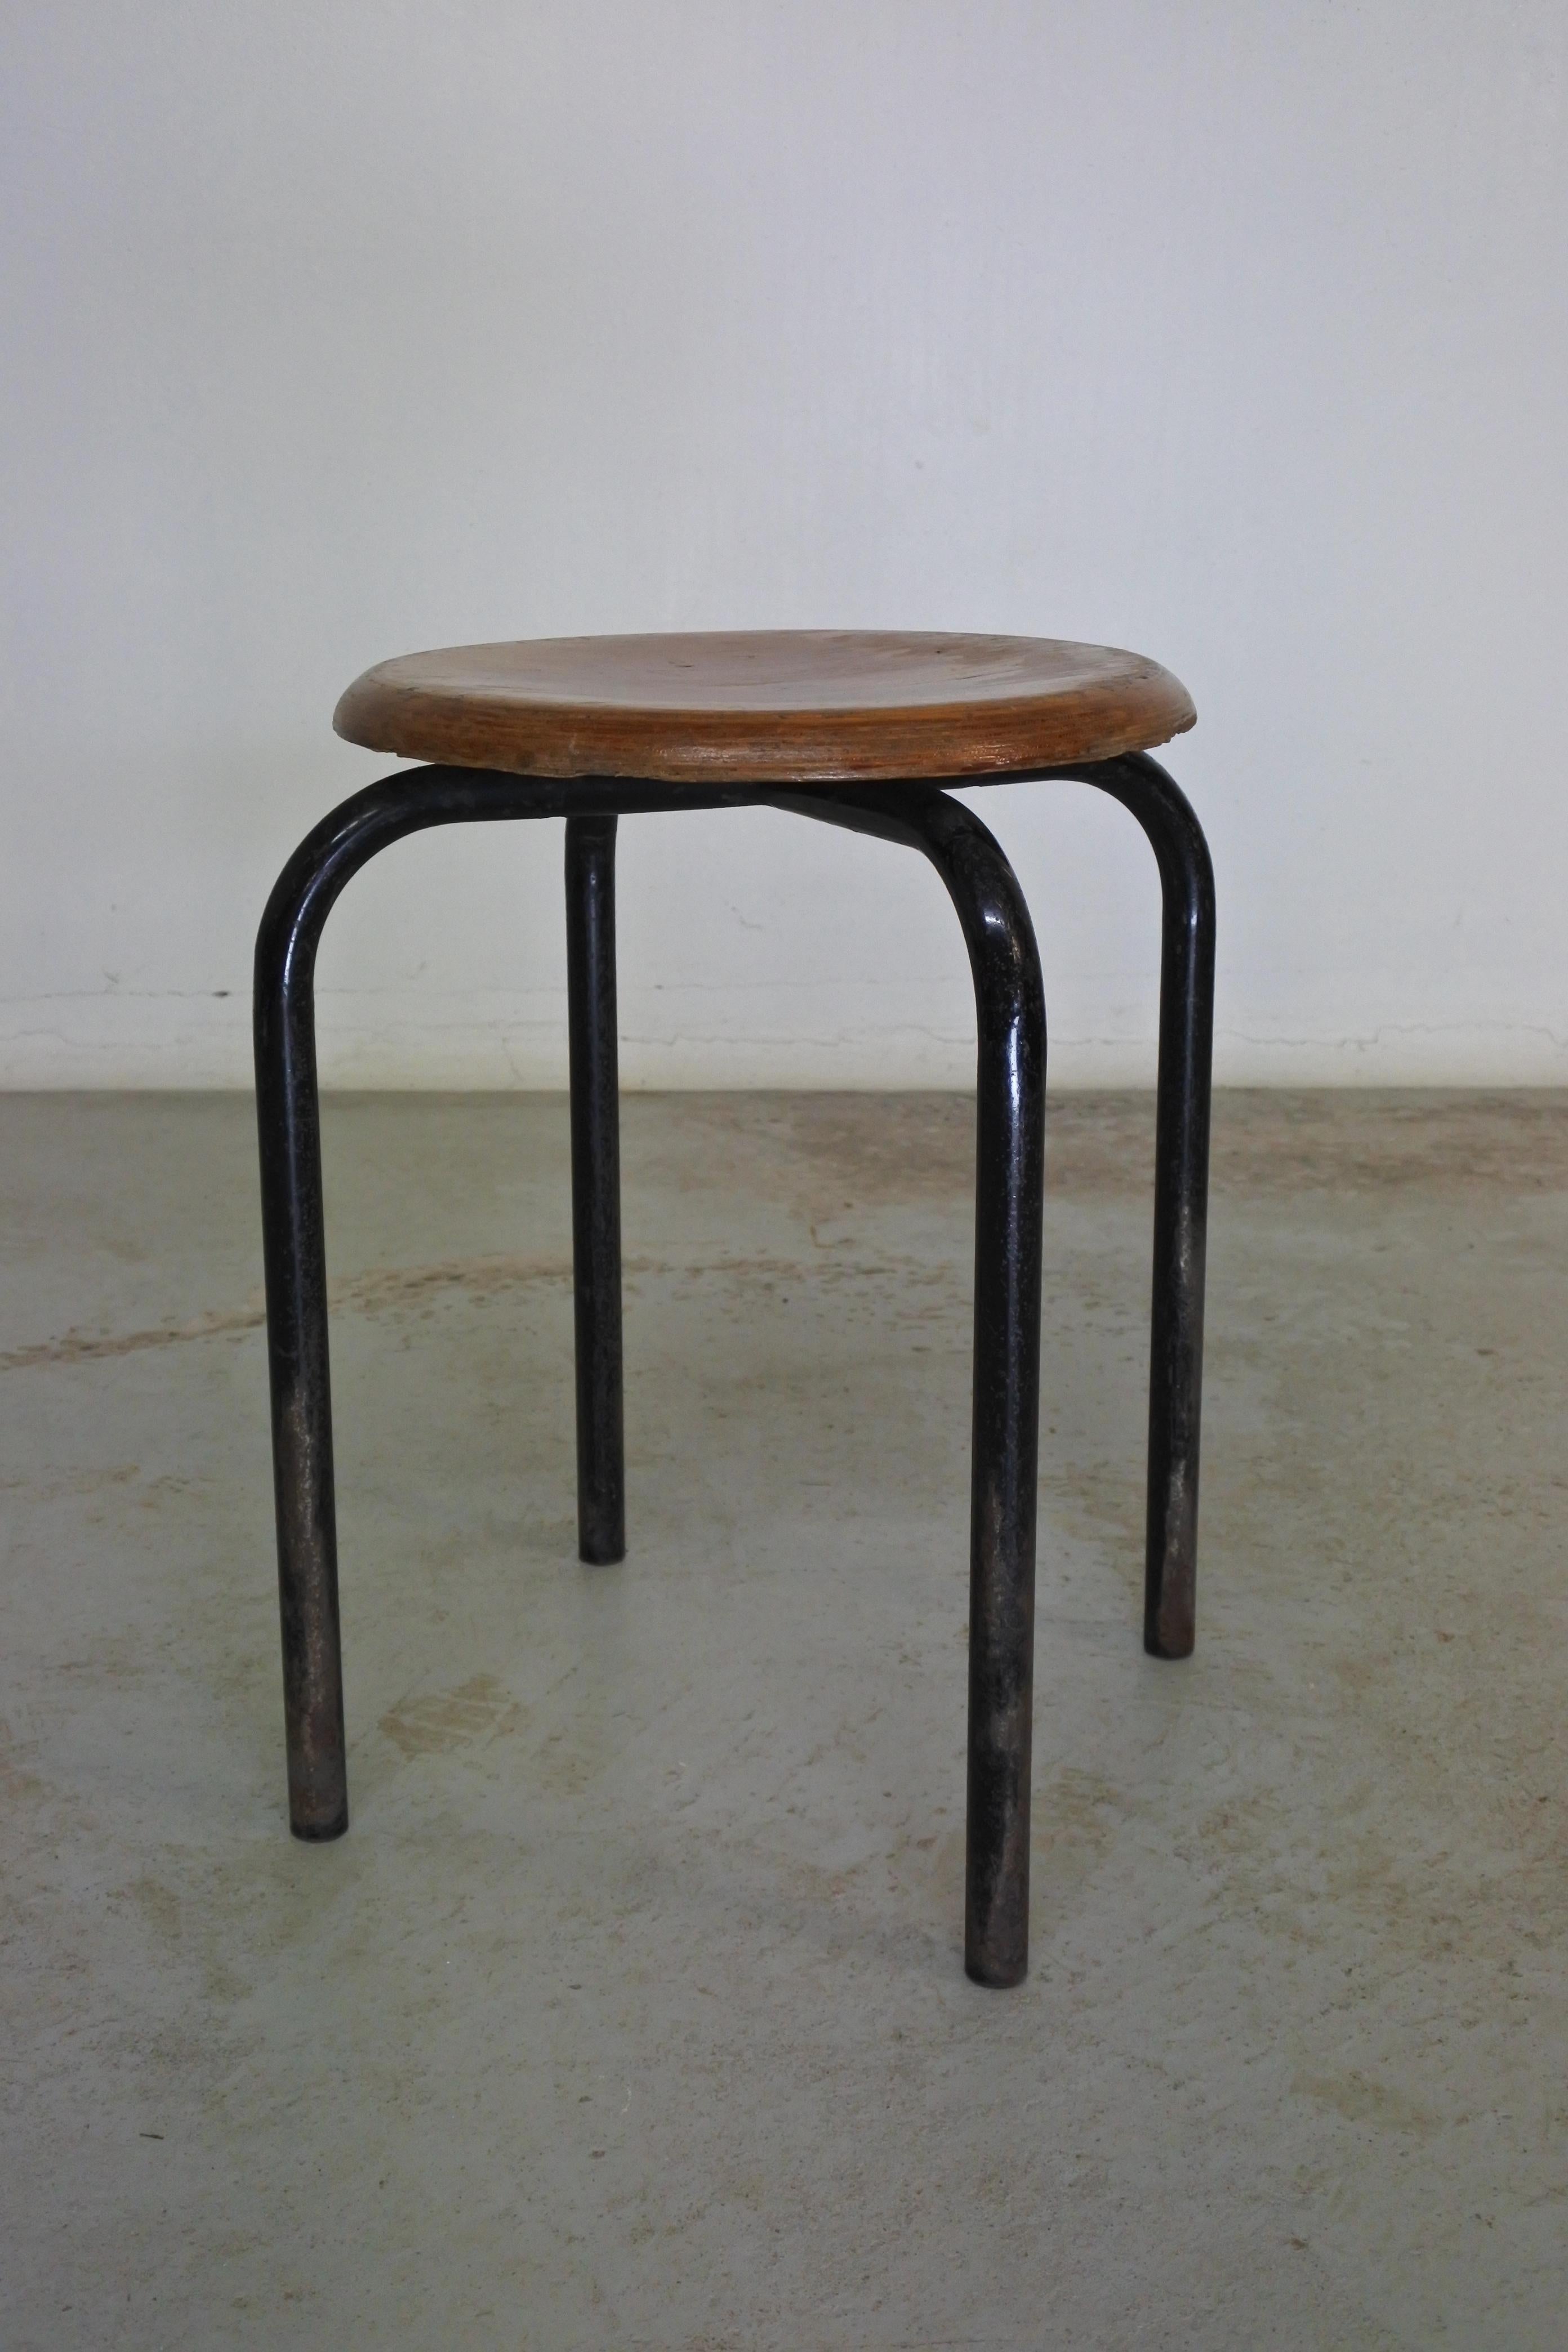 Mid-20th Century Mid-Century Modern Wood & Metal Stool Attr. to Atelier Jean Prouve, France 1950s